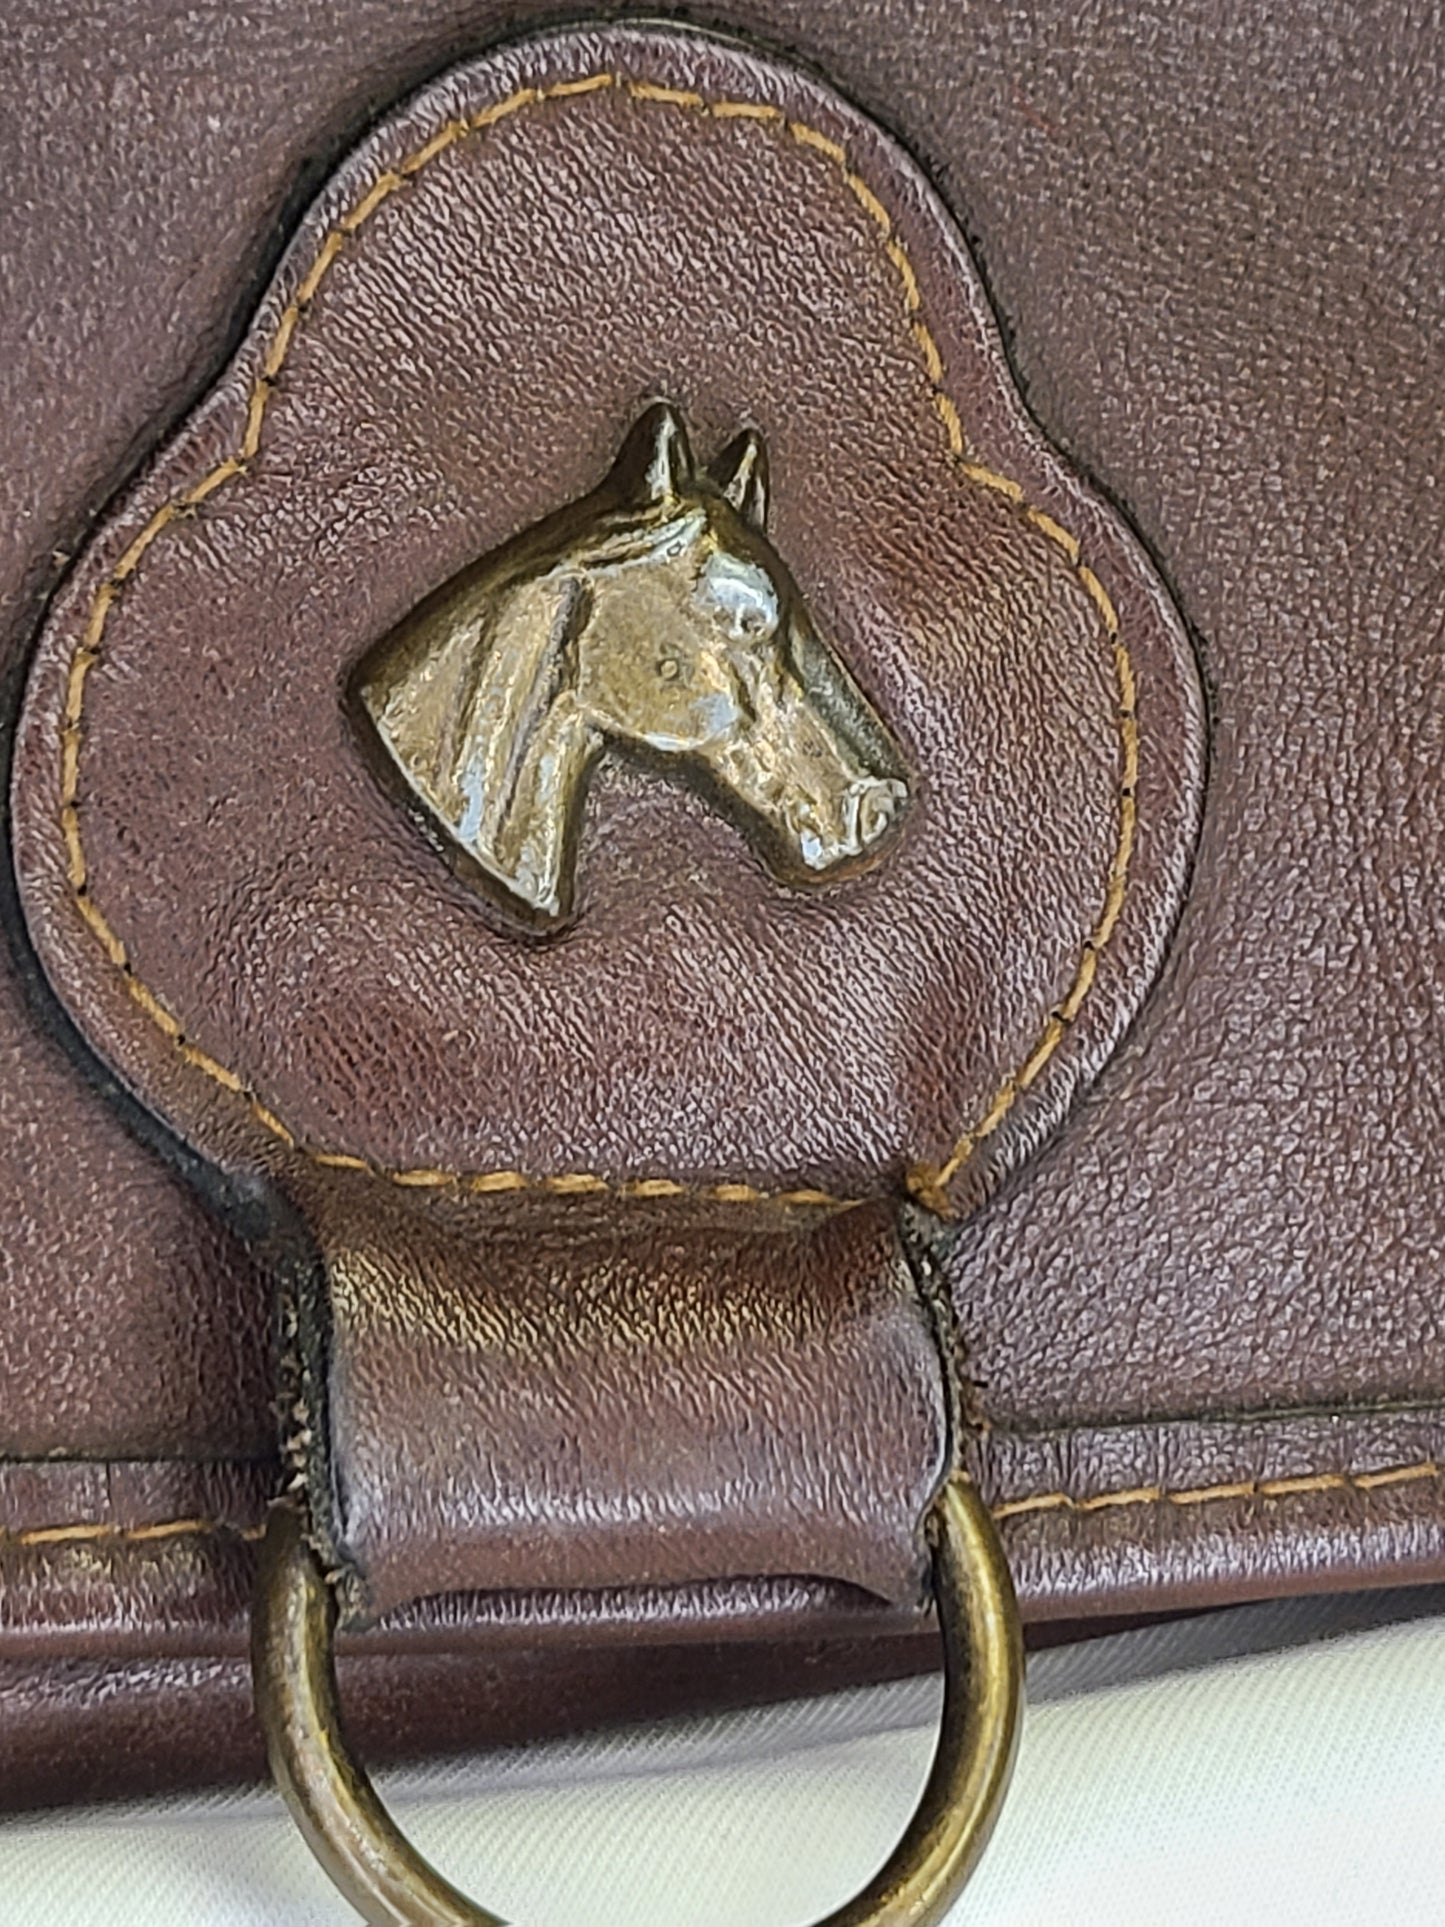 Vintage 1980s Leather Bag With Antique Brass Horse